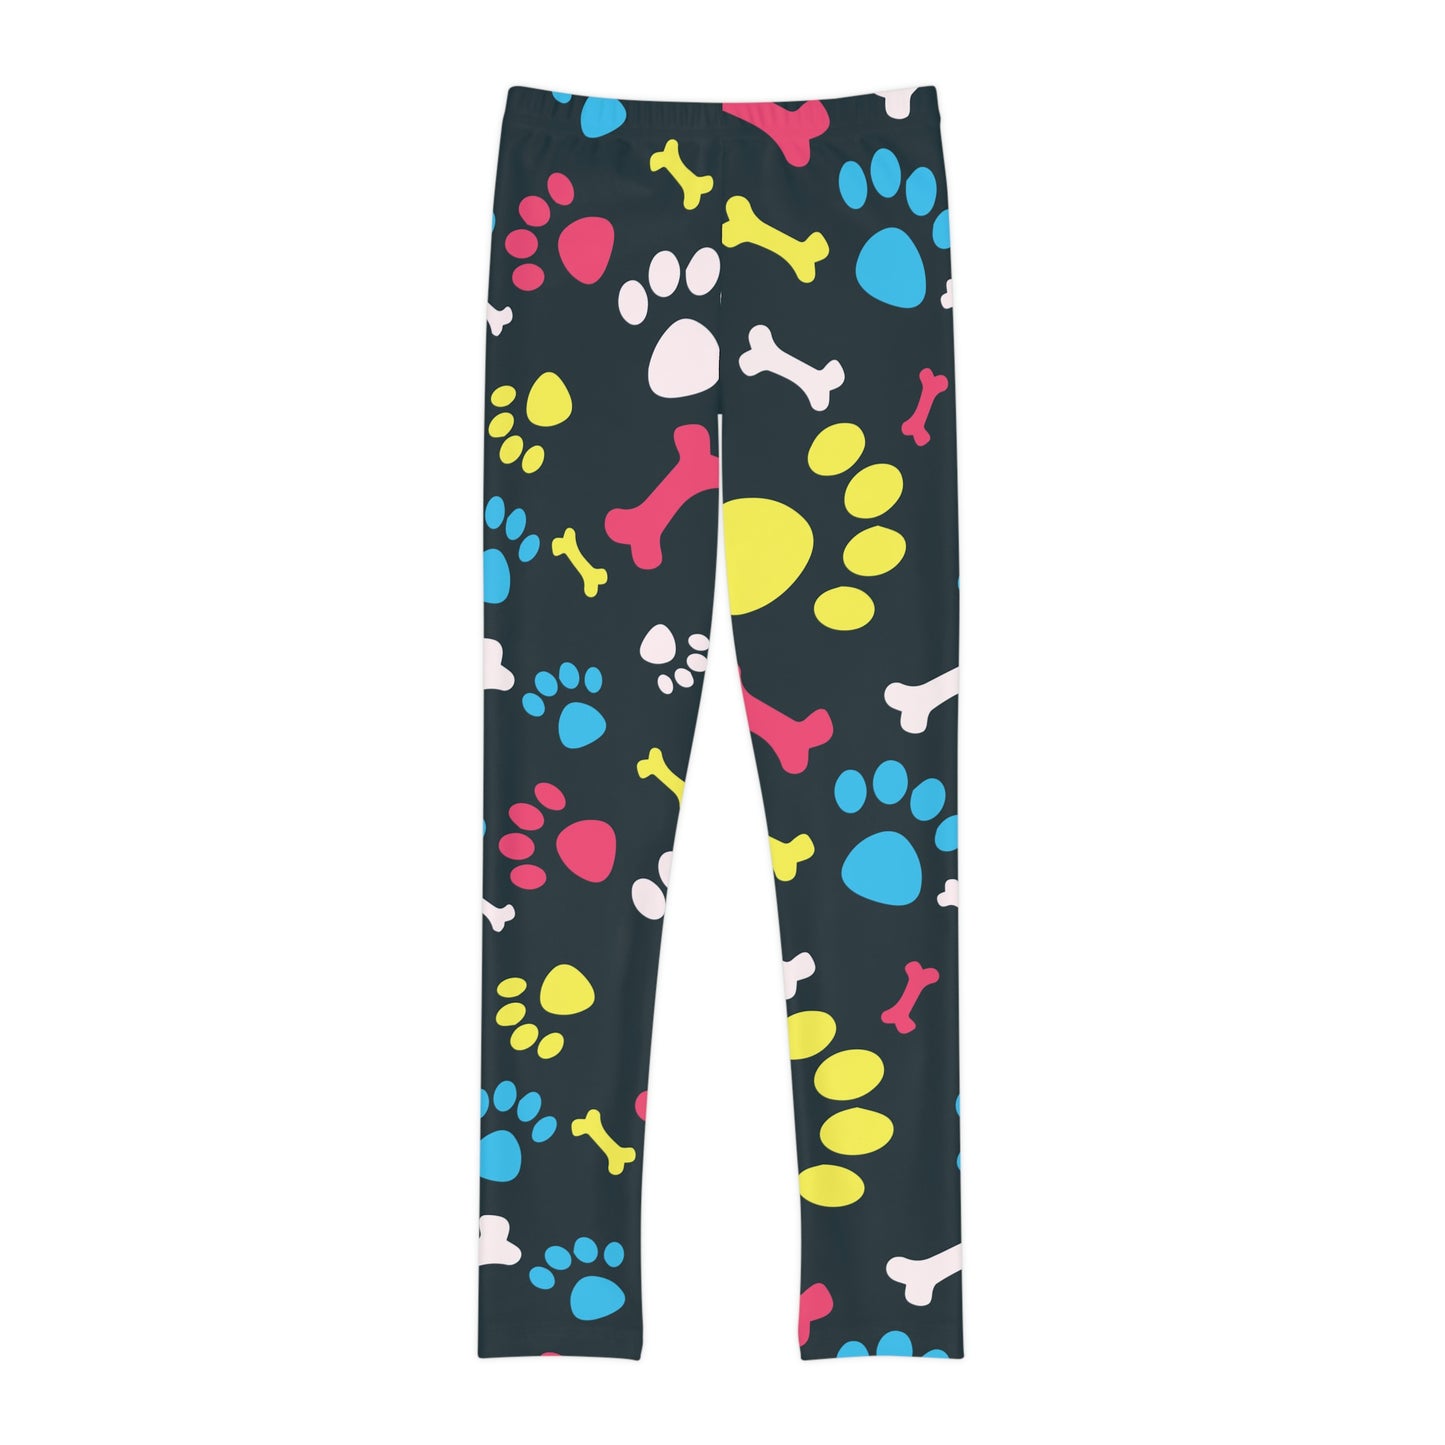 Dog Lovers Youth Leggings,  One of a Kind Gift - Unique Workout Activewear tights for  kids fitness, Daughter, Niece  Christmas Gift